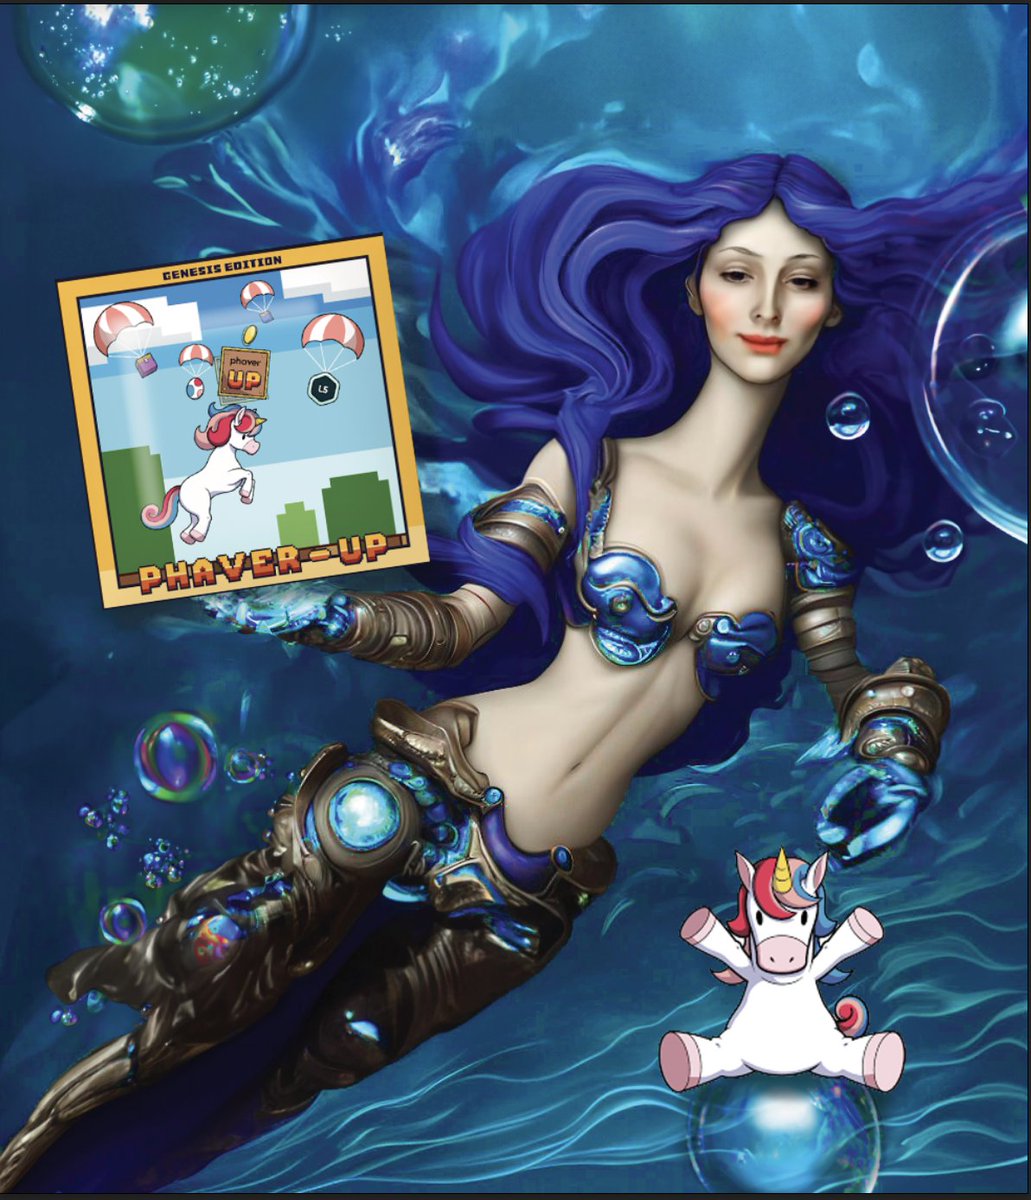 Amazing creatures! @phaverapp has decided to GIFT the phaver lagoon community members of A SPECIAL UNDERWATER RAFFLE of 2 PHAVER UP GENESIS NFT🤯 To participate go to monniverse.xyz and look for the Mermaid Tail for instructions! @phaverapp will SELECT the winners !